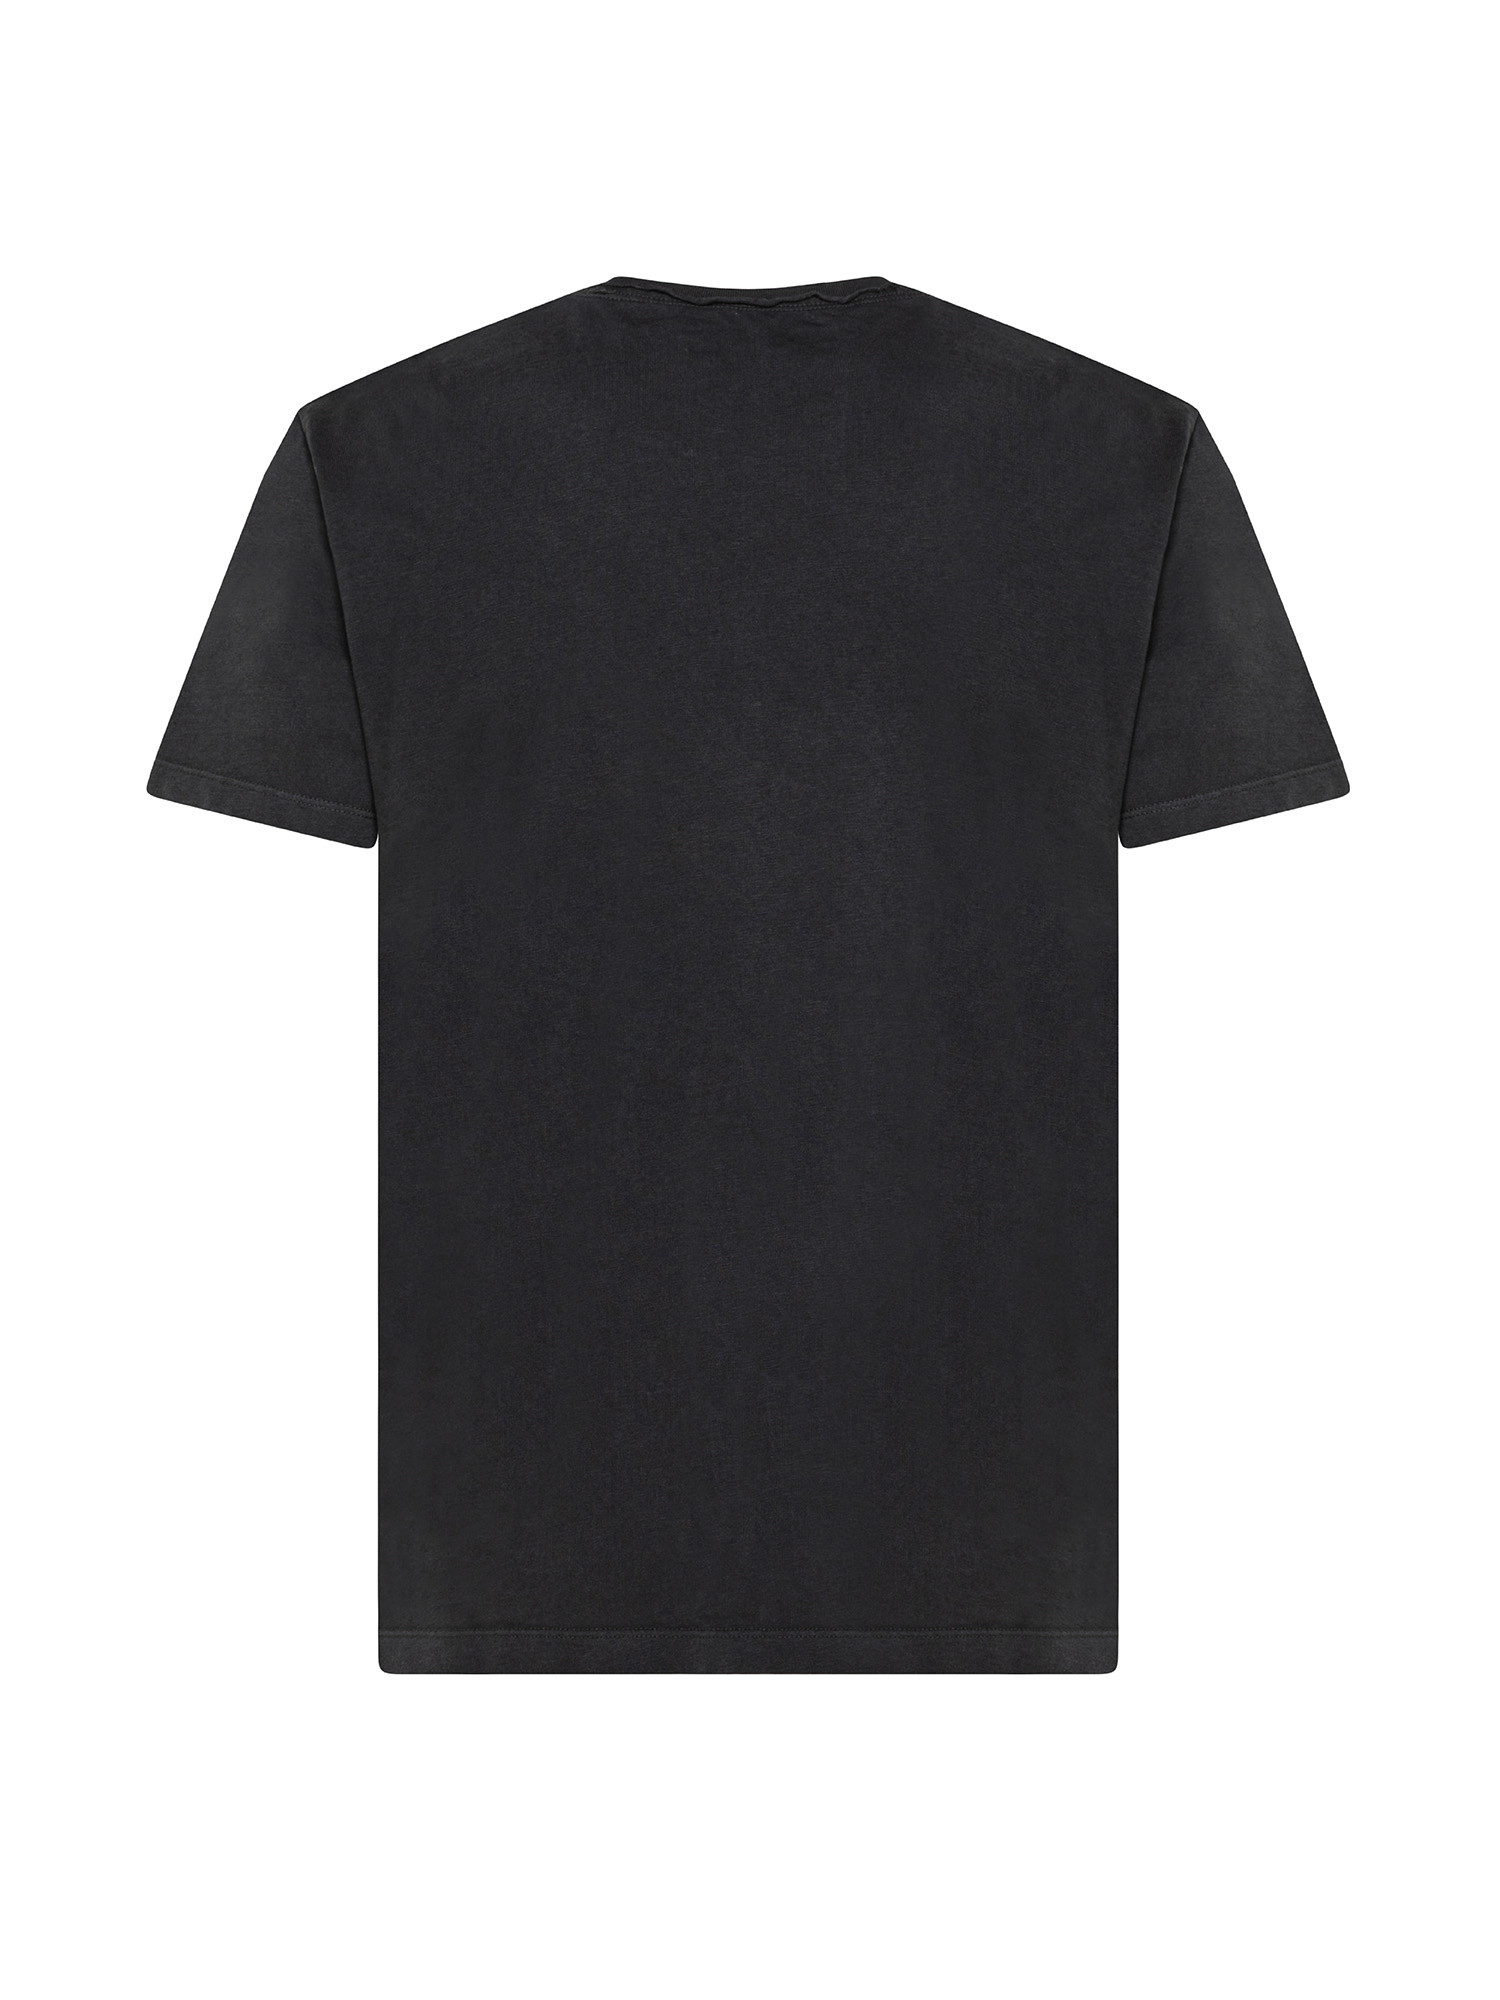 Jersey T-shirt with print, Black, large image number 1